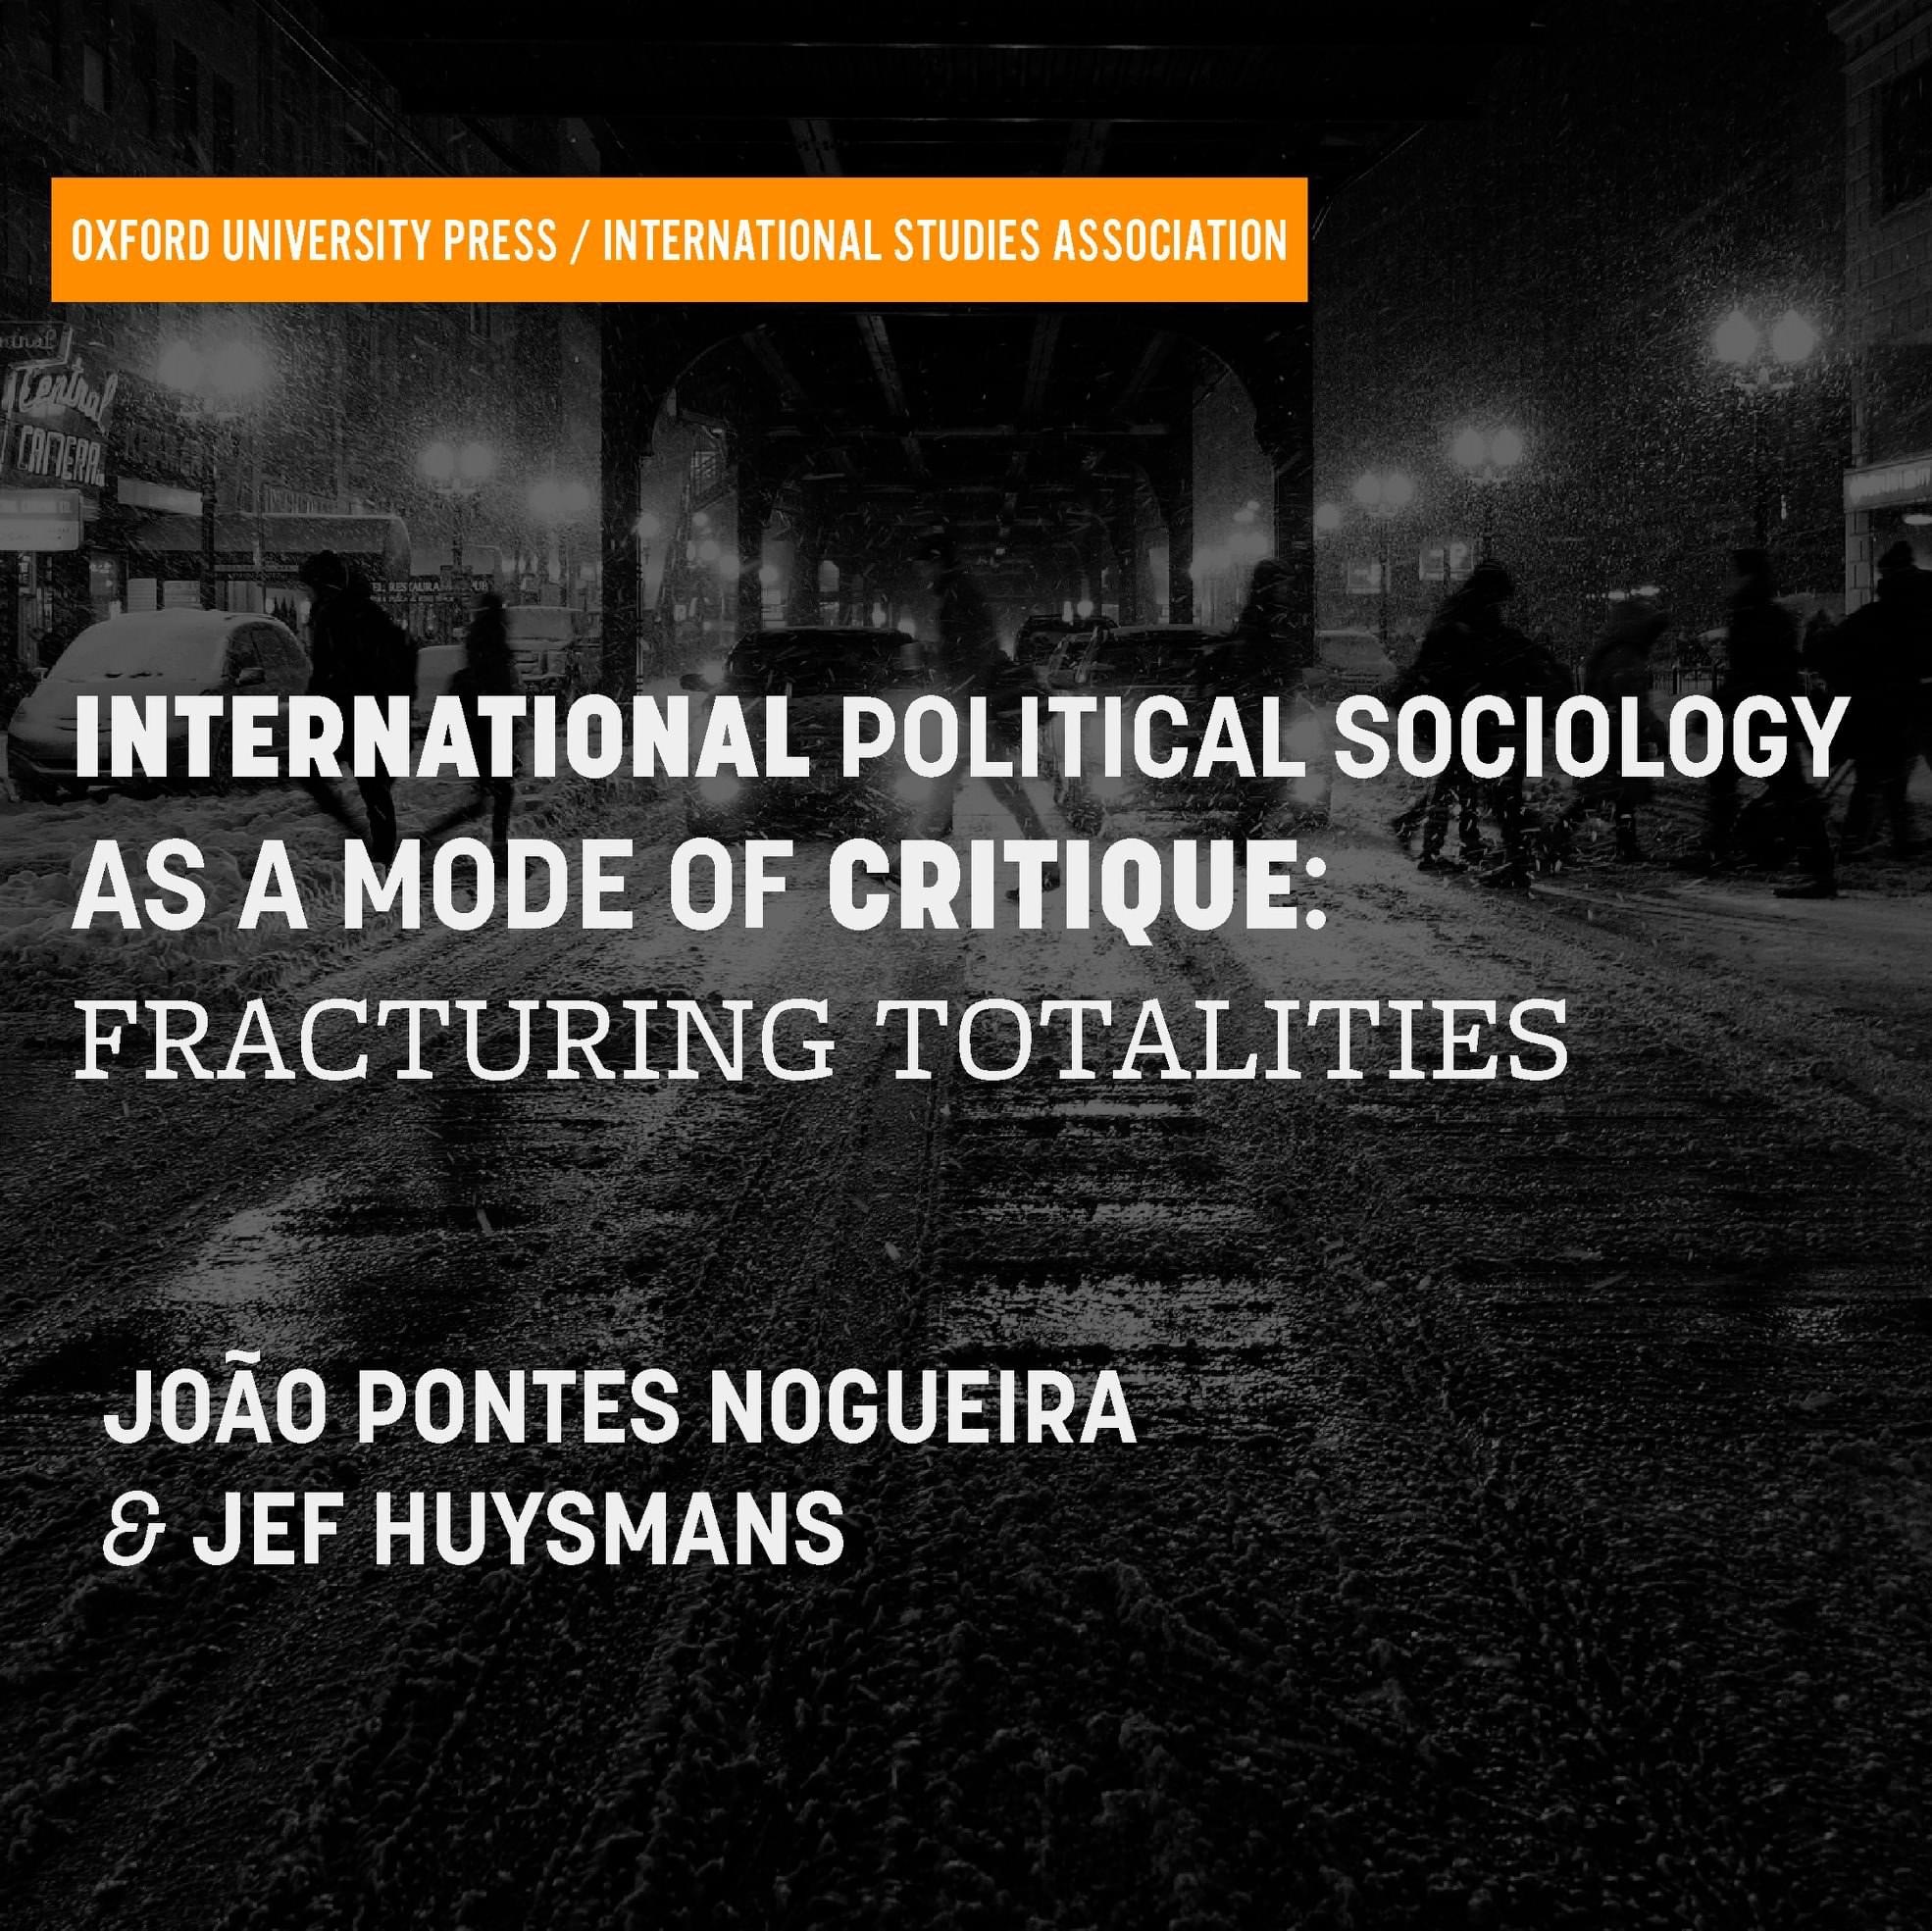 International Political Sociology as a Mode of Critique: Fracturing Totalities